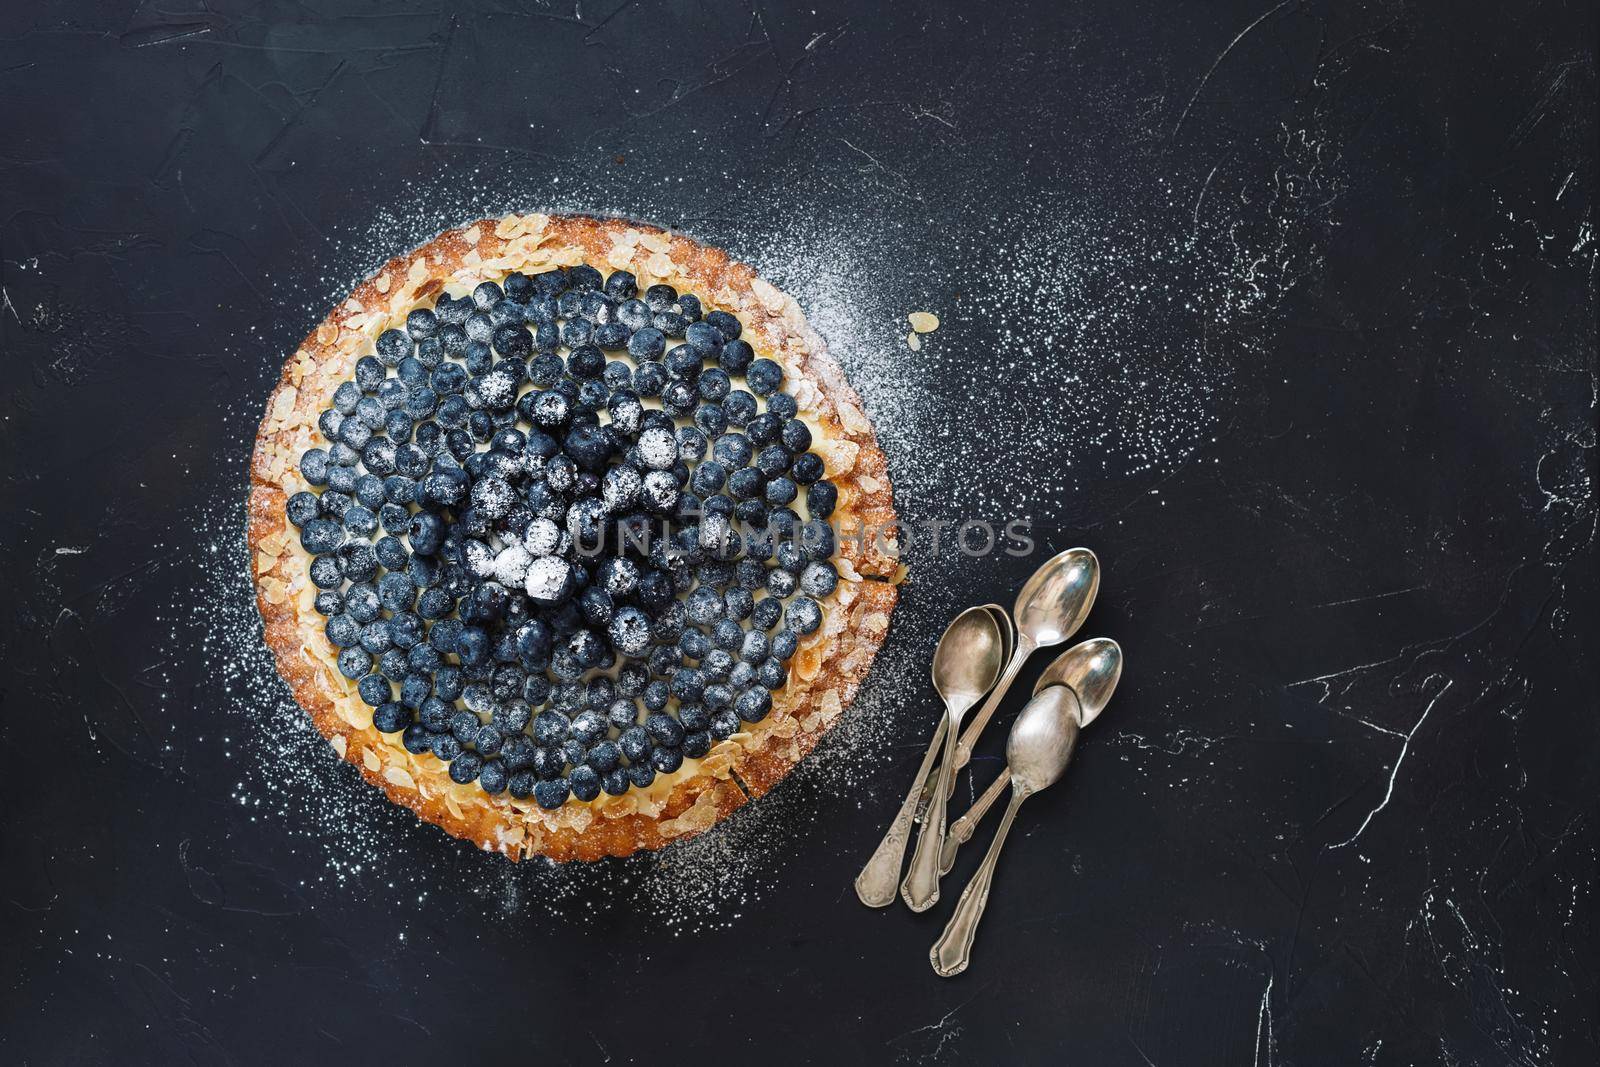 Delicious homemade blueberry almond tart with fresh blueberries and bunch of teaspoons beside. Top  view, blank space, dark toned image by Slast20